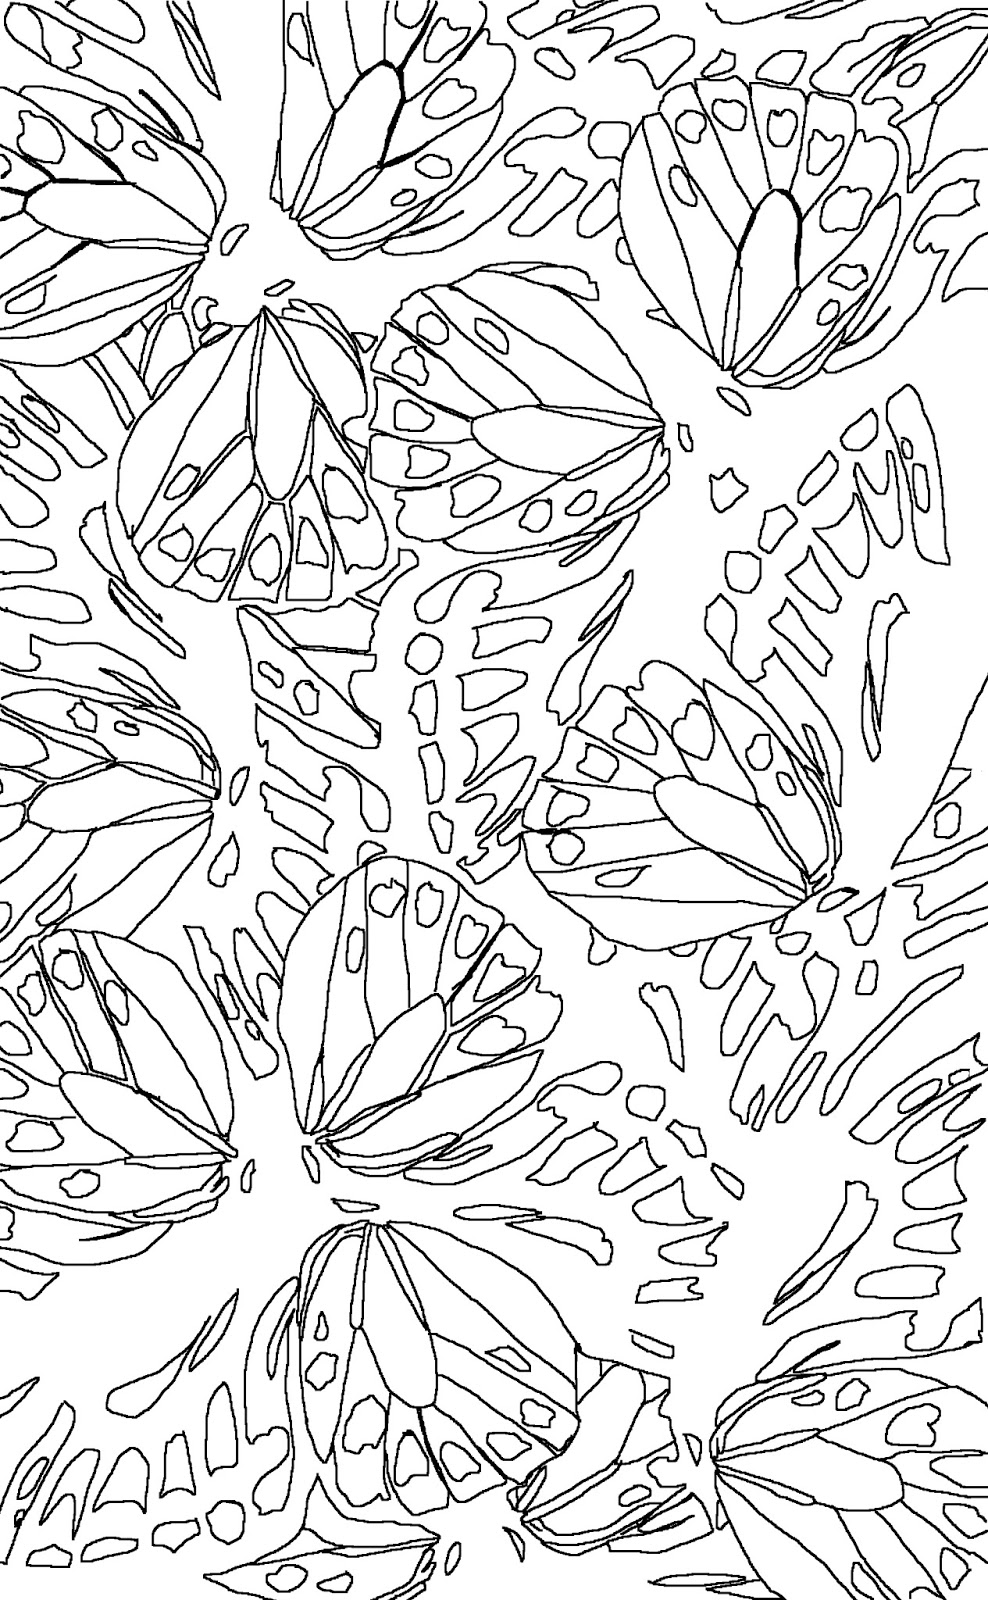 Download Coloring Page World: Butterfly Print (Portrait)